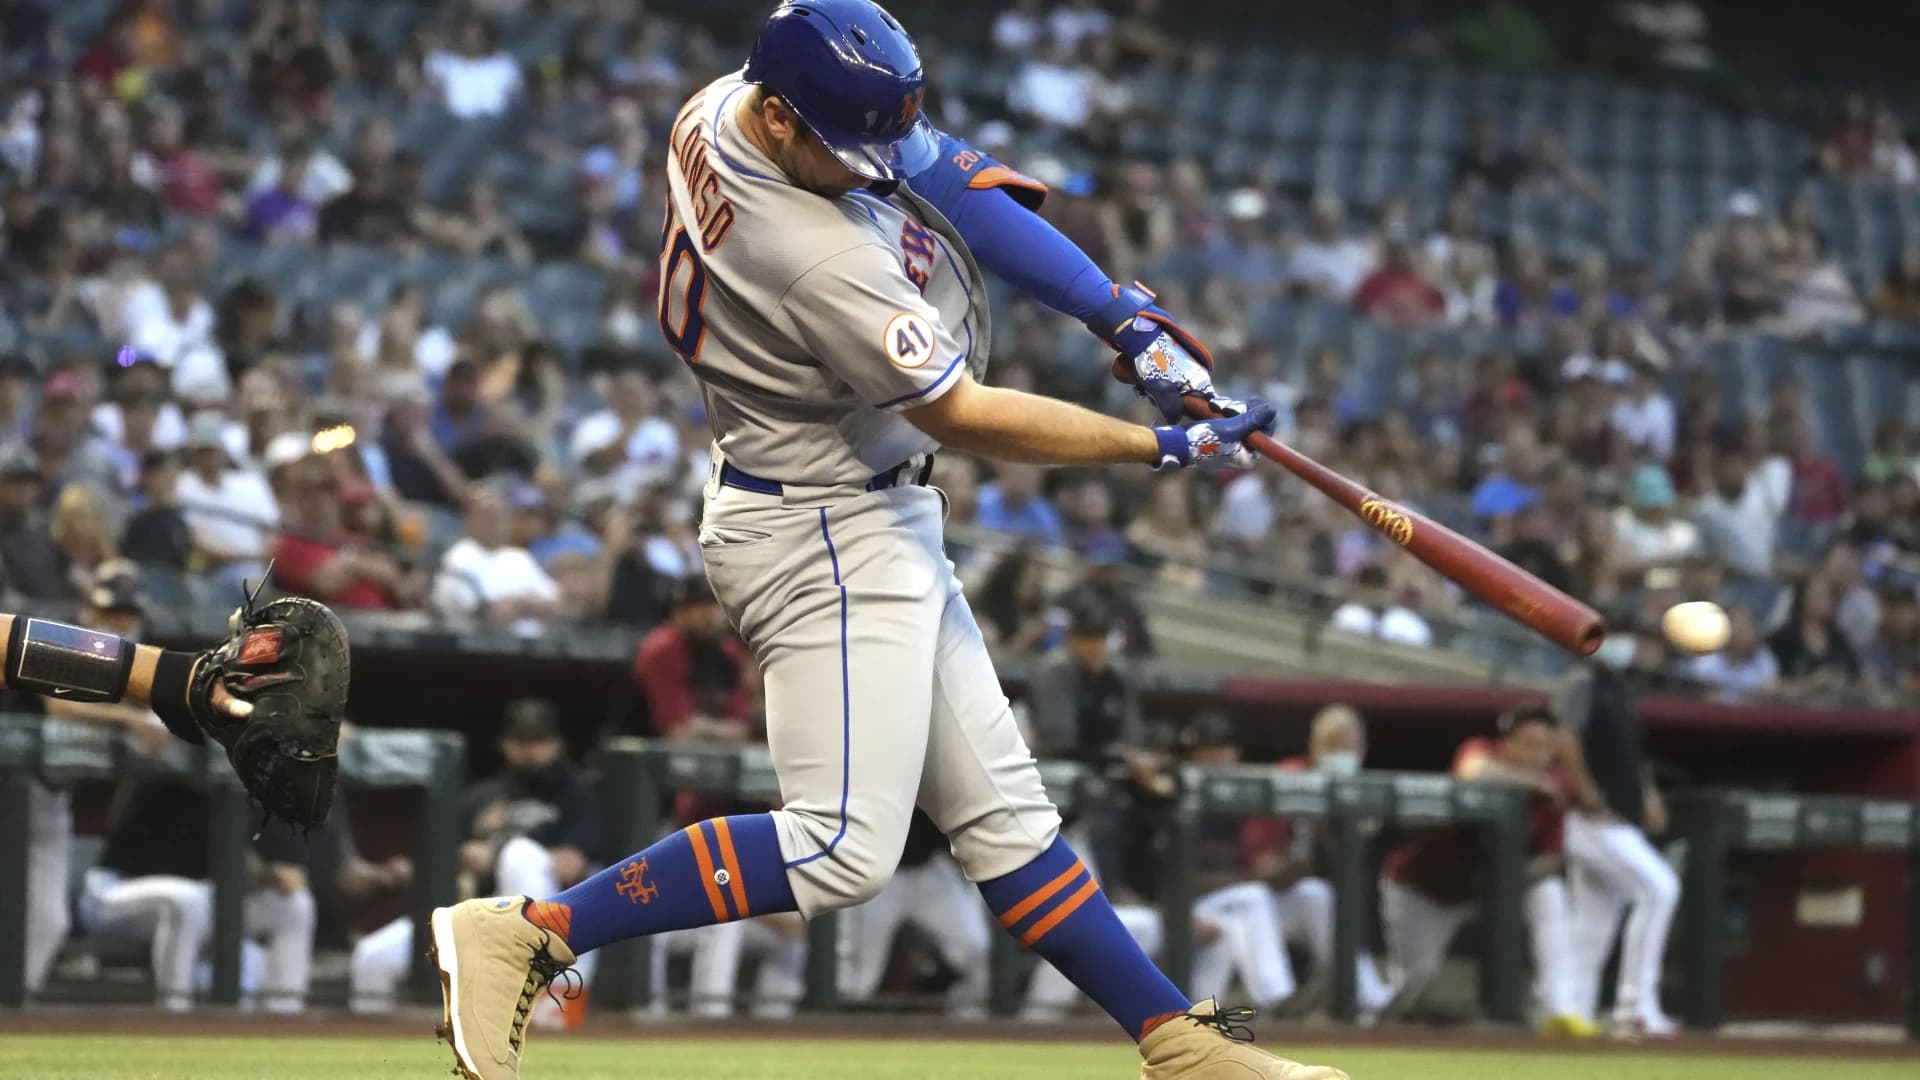 Two-time champion Pete Alonso to participate in Home Run Derby at All-Star Game